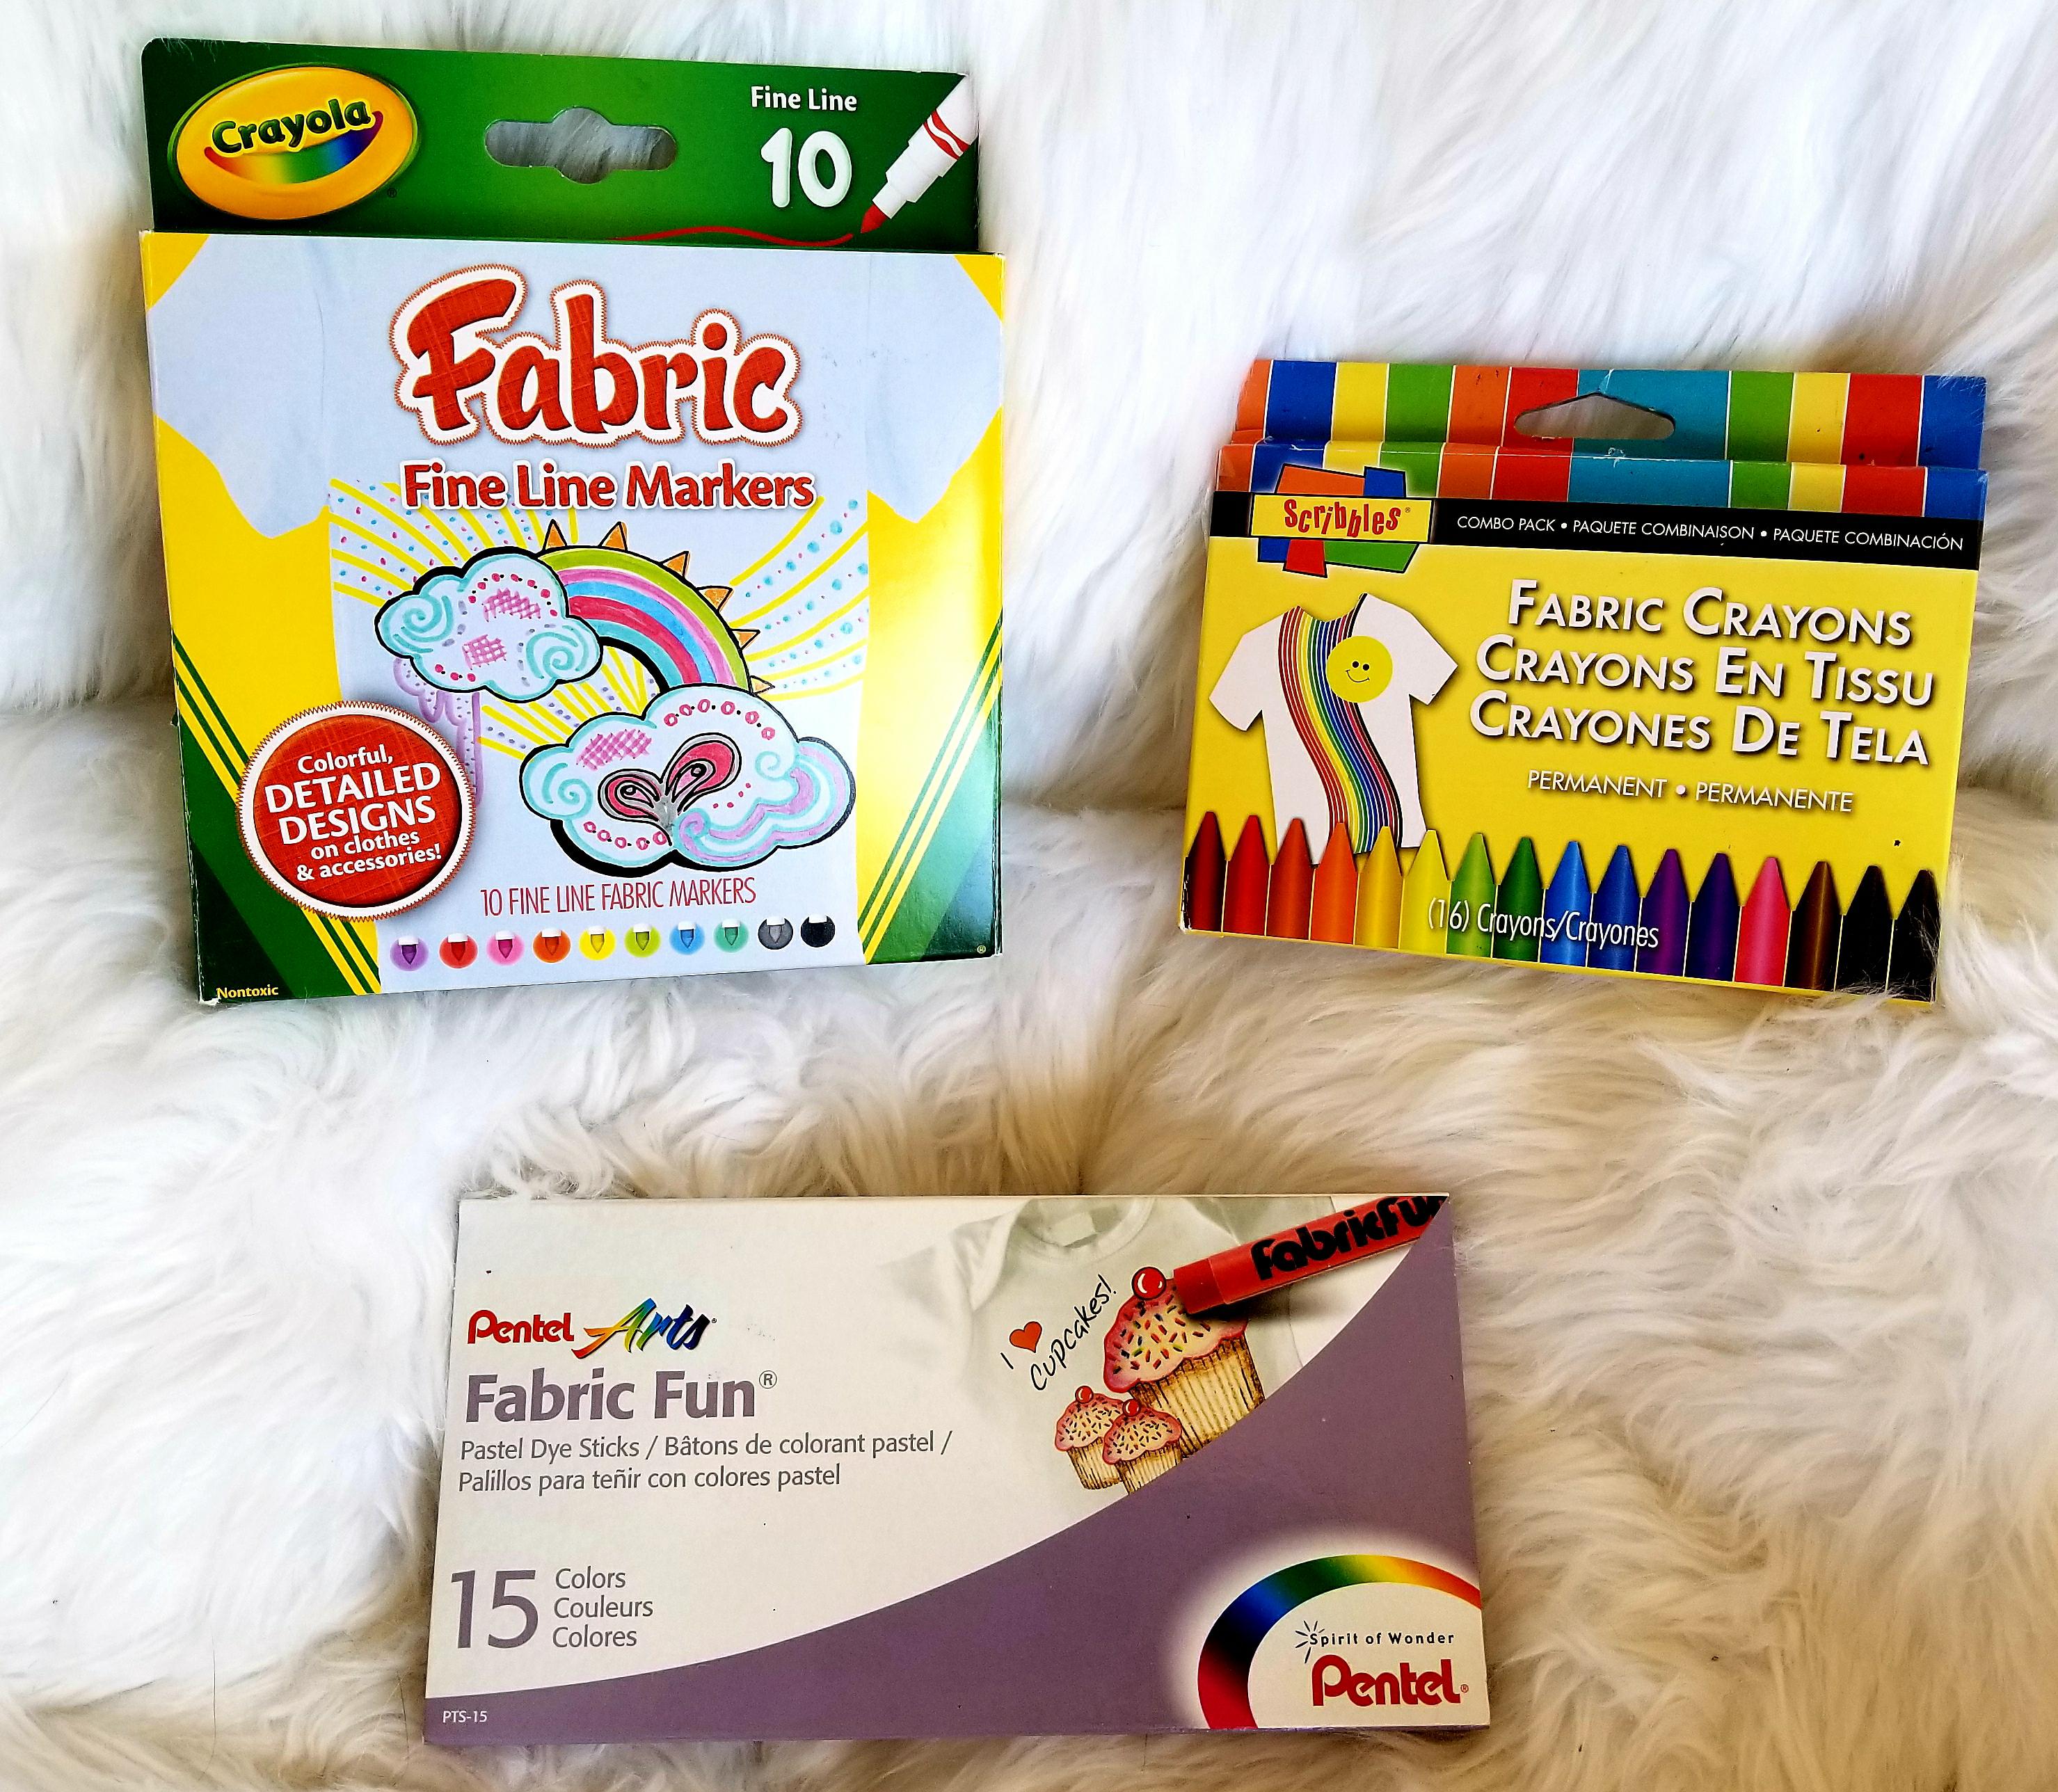 How to Use Crayola Fabric Markers